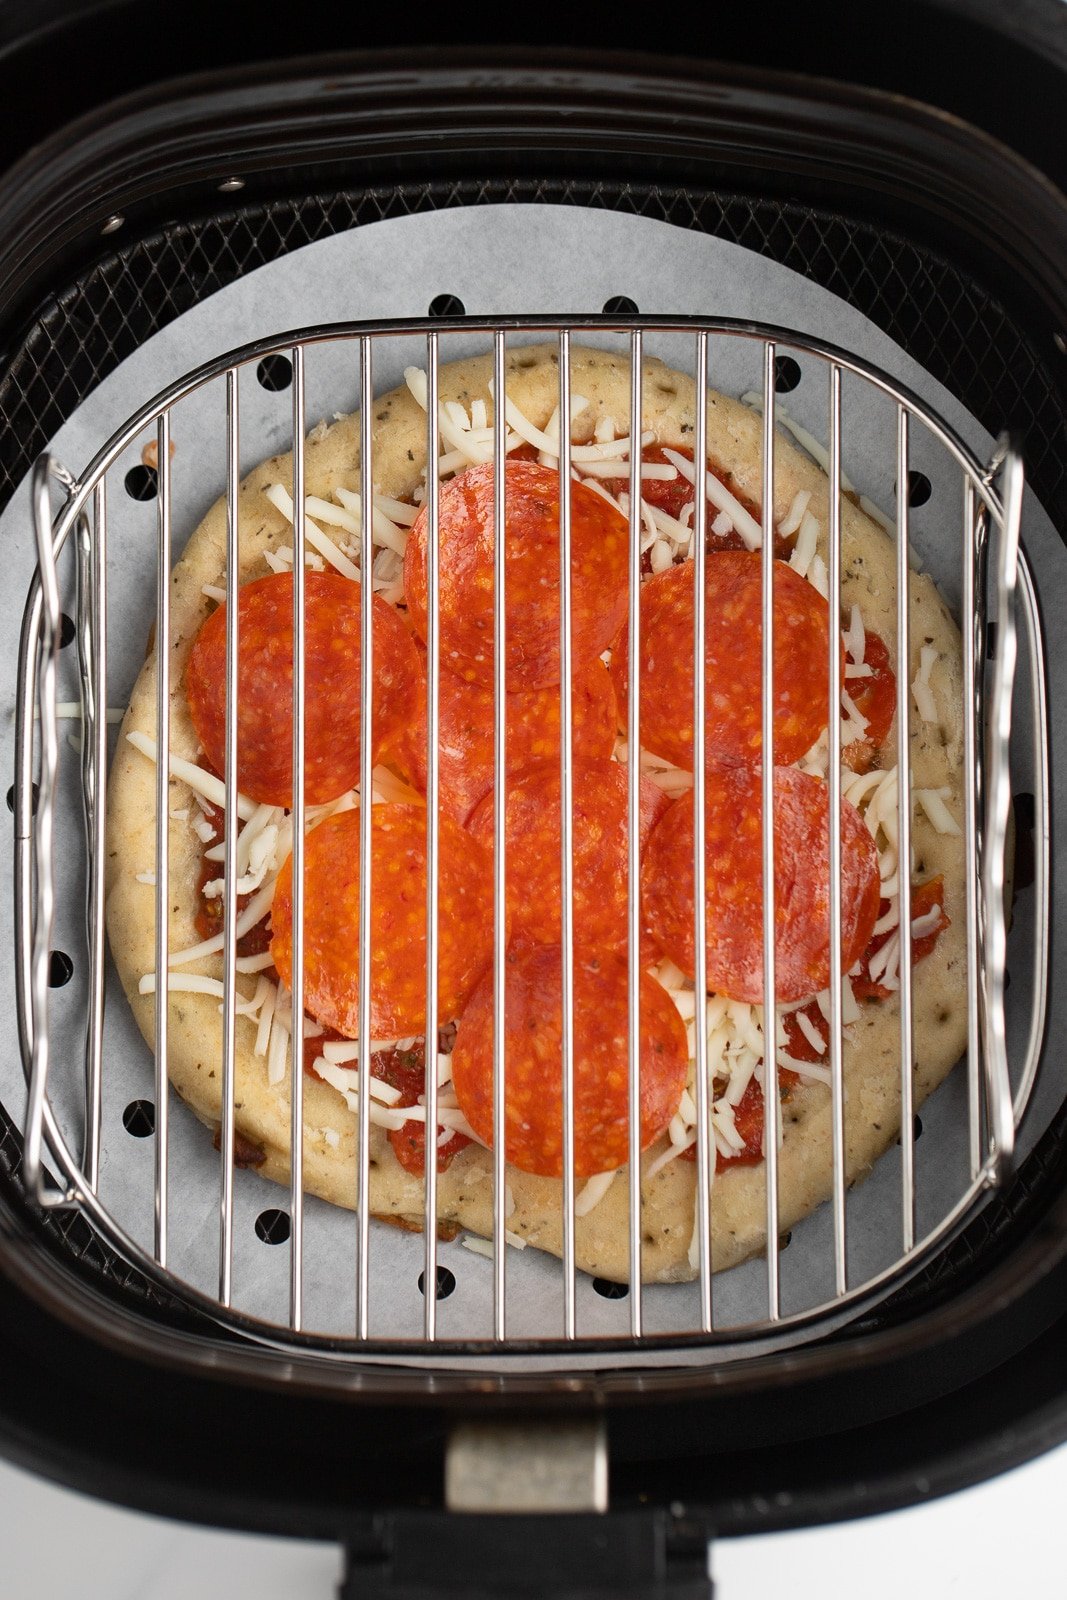 The uncooked pizza in the air fryer basket.